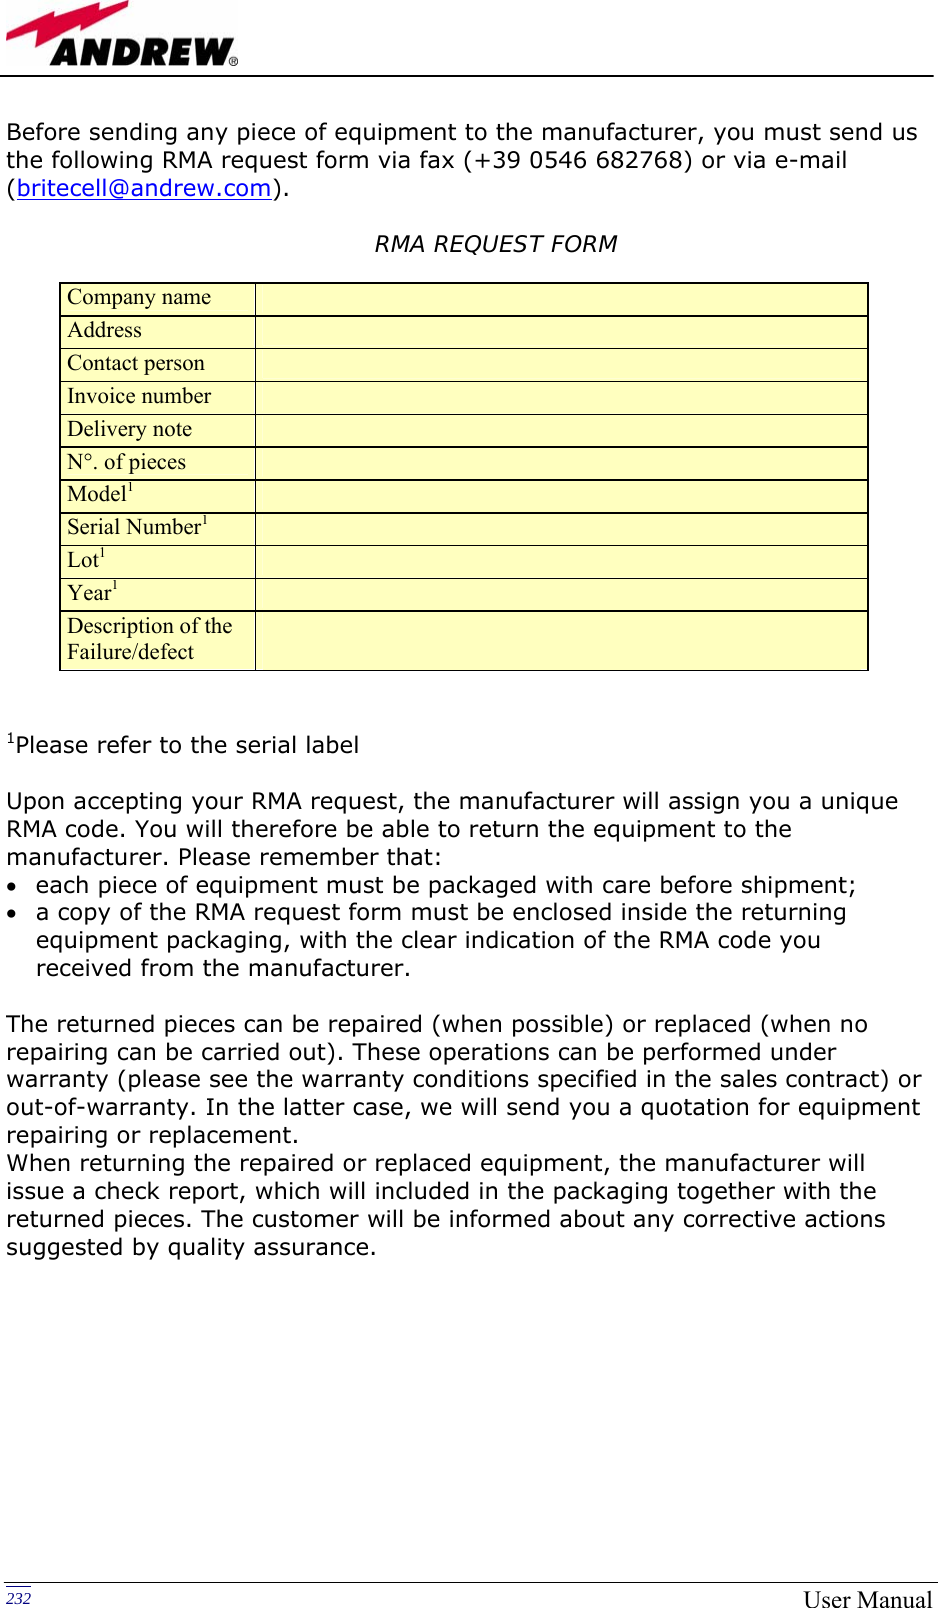   232 User ManualBefore sending any piece of equipment to the manufacturer, you must send us the following RMA request form via fax (+39 0546 682768) or via e-mail (britecell@andrew.com).       RMA REQUEST FORM                  1Please refer to the serial label   Upon accepting your RMA request, the manufacturer will assign you a unique RMA code. You will therefore be able to return the equipment to the manufacturer. Please remember that: • each piece of equipment must be packaged with care before shipment; • a copy of the RMA request form must be enclosed inside the returning equipment packaging, with the clear indication of the RMA code you received from the manufacturer.  The returned pieces can be repaired (when possible) or replaced (when no repairing can be carried out). These operations can be performed under warranty (please see the warranty conditions specified in the sales contract) or out-of-warranty. In the latter case, we will send you a quotation for equipment repairing or replacement. When returning the repaired or replaced equipment, the manufacturer will issue a check report, which will included in the packaging together with the returned pieces. The customer will be informed about any corrective actions suggested by quality assurance. Company name   Address   Contact person   Invoice number   Delivery note   N°. of pieces   Model1  Serial Number1  Lot1  Year1  Description of the  Failure/defect   